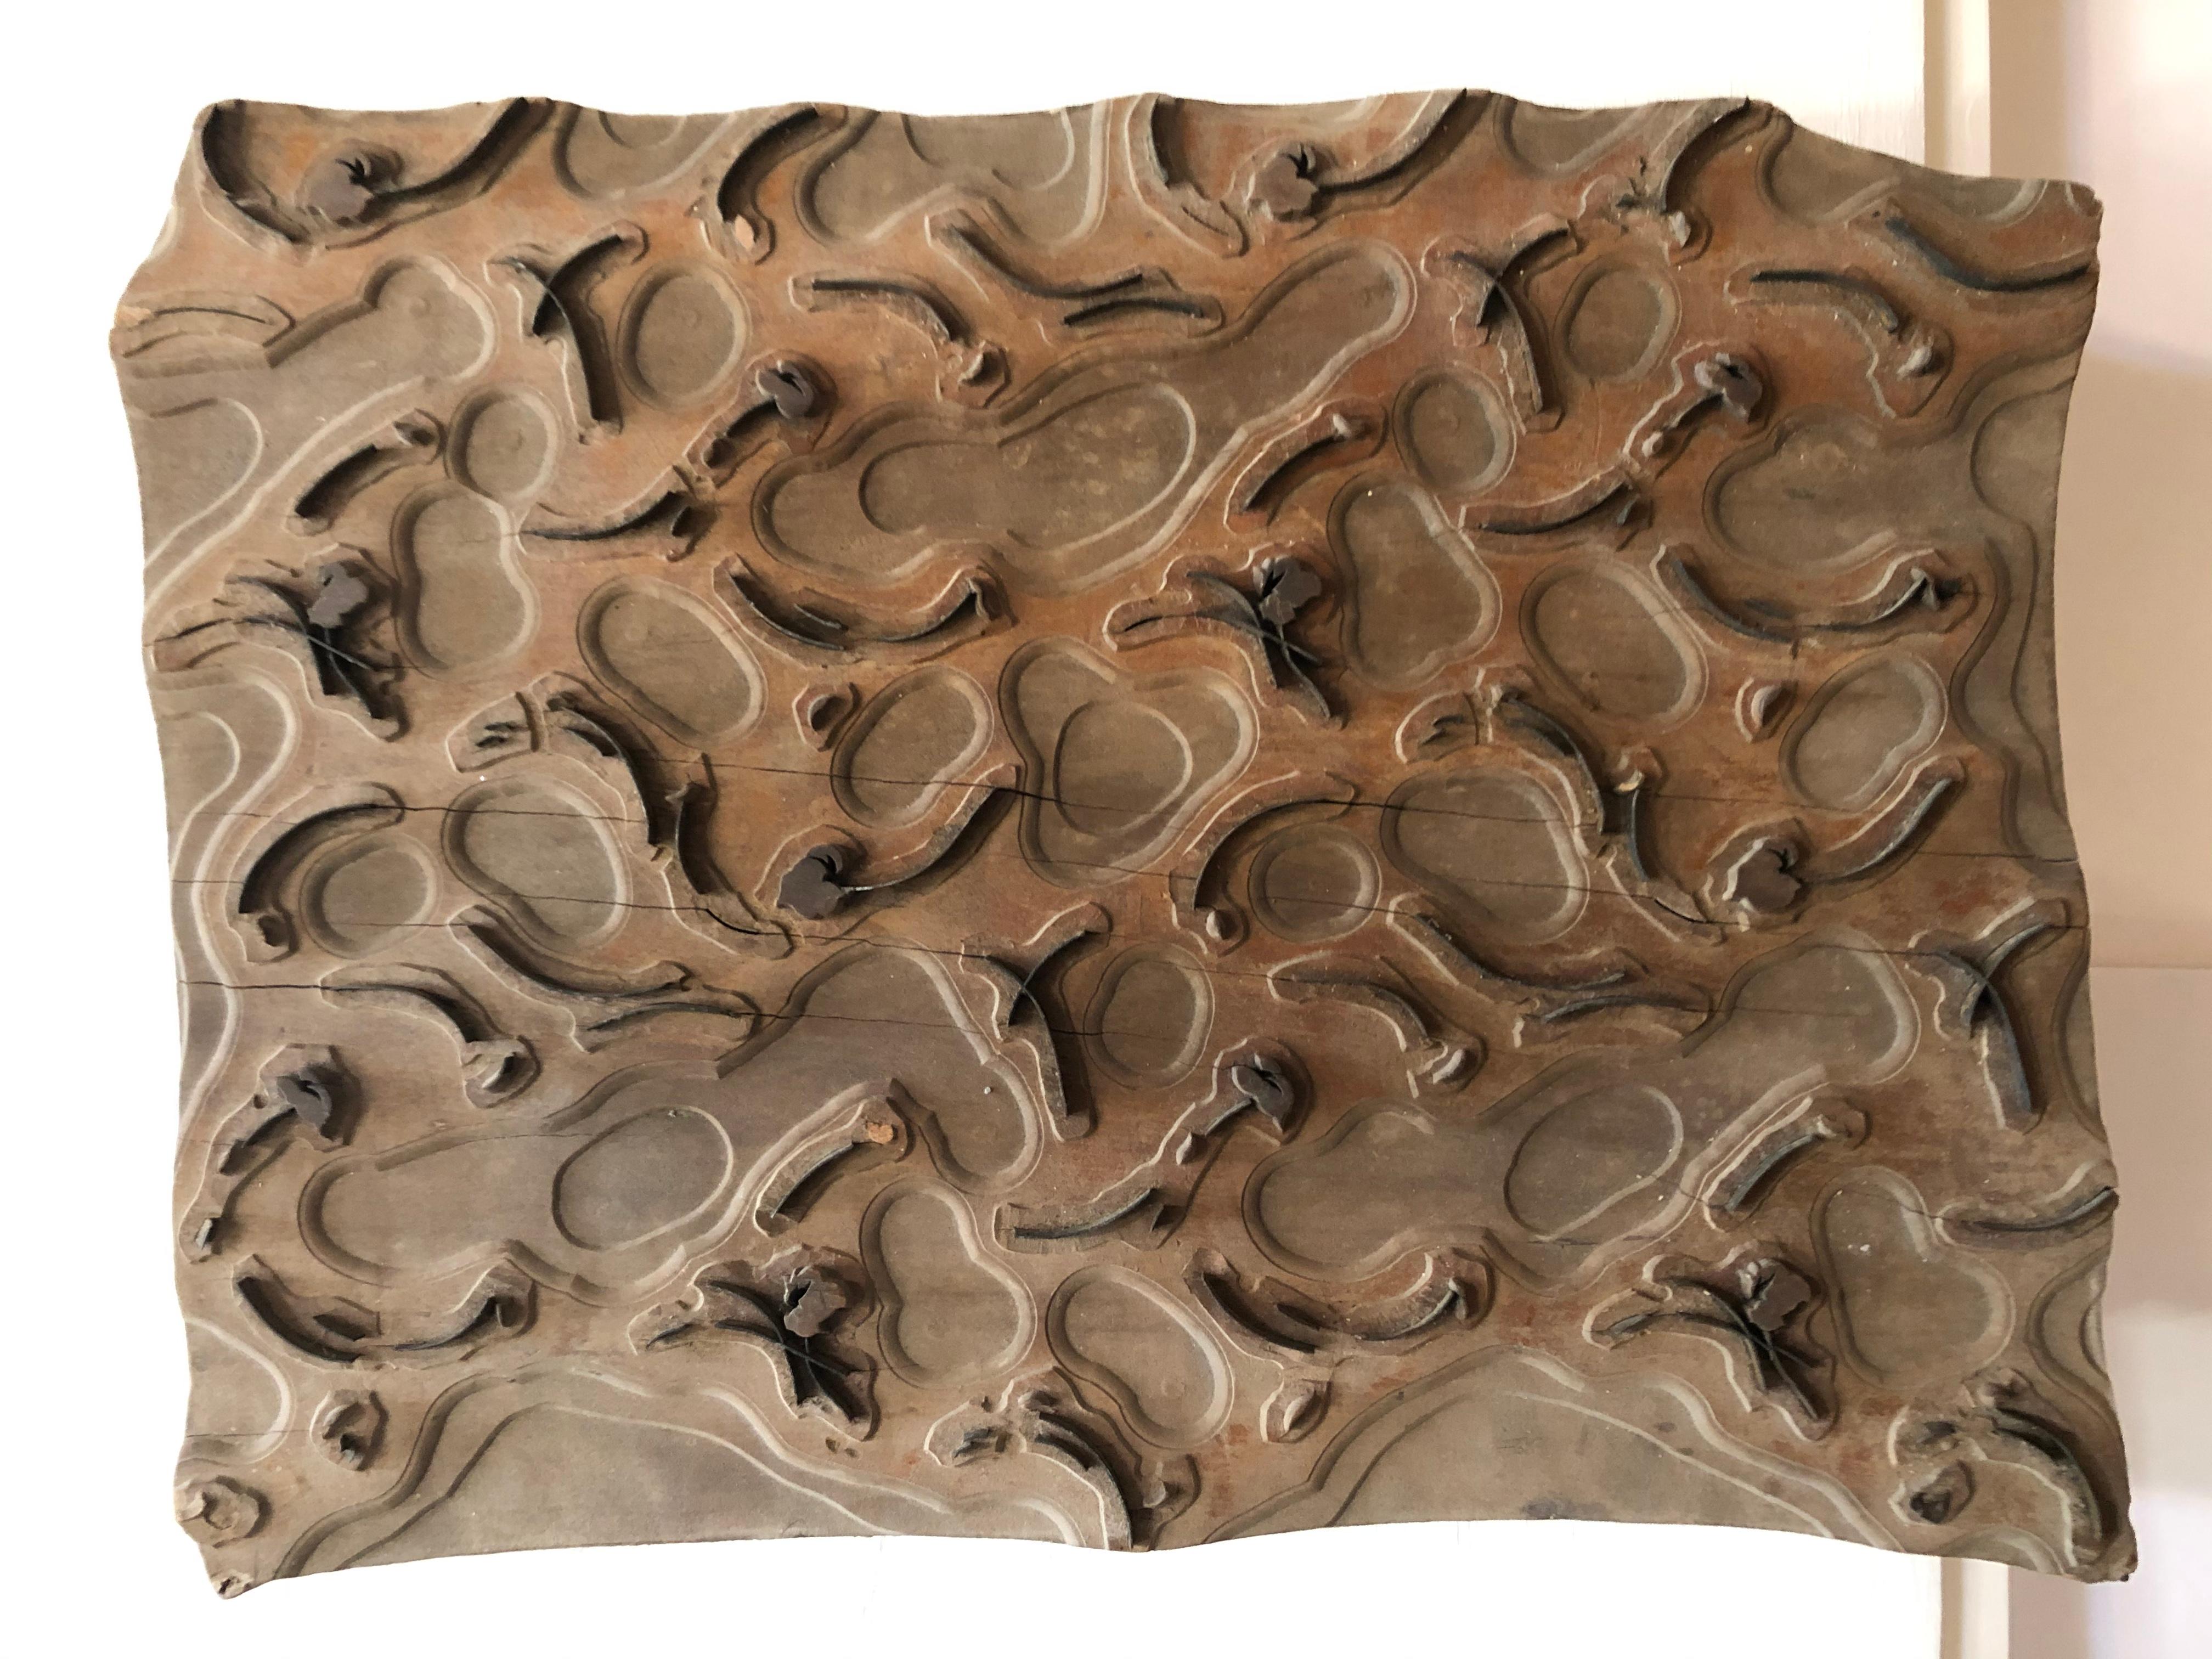 Bianchini-Ferier Circa 1880- 1900 textile design wood and metal fabric block, sold exclusively by lord and Taylor department store 1930's. Hand carved and created in Lyons France.